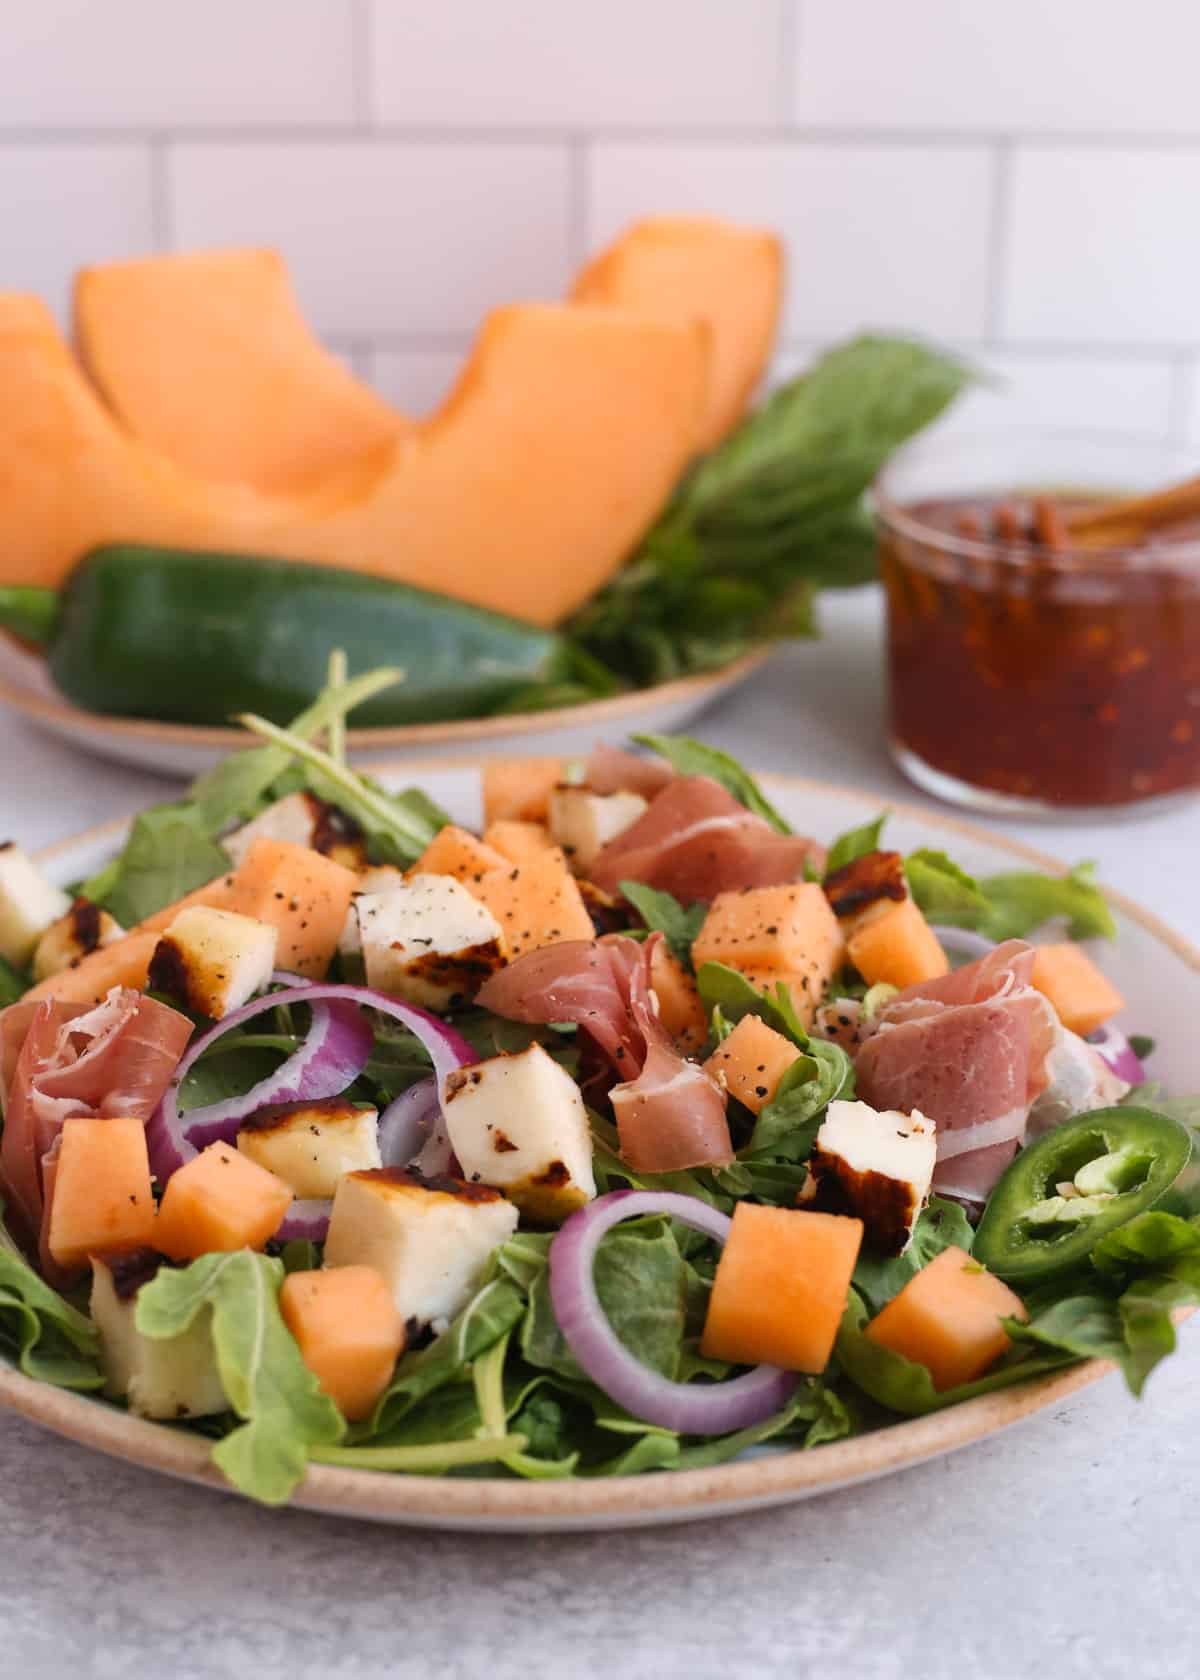 A ceramic plate filled with halloumi salad and garnished with cantaloupe, hot honey dressing, red onion, and prosciutto is served on a kitchen countertop with additional ingredients in the background